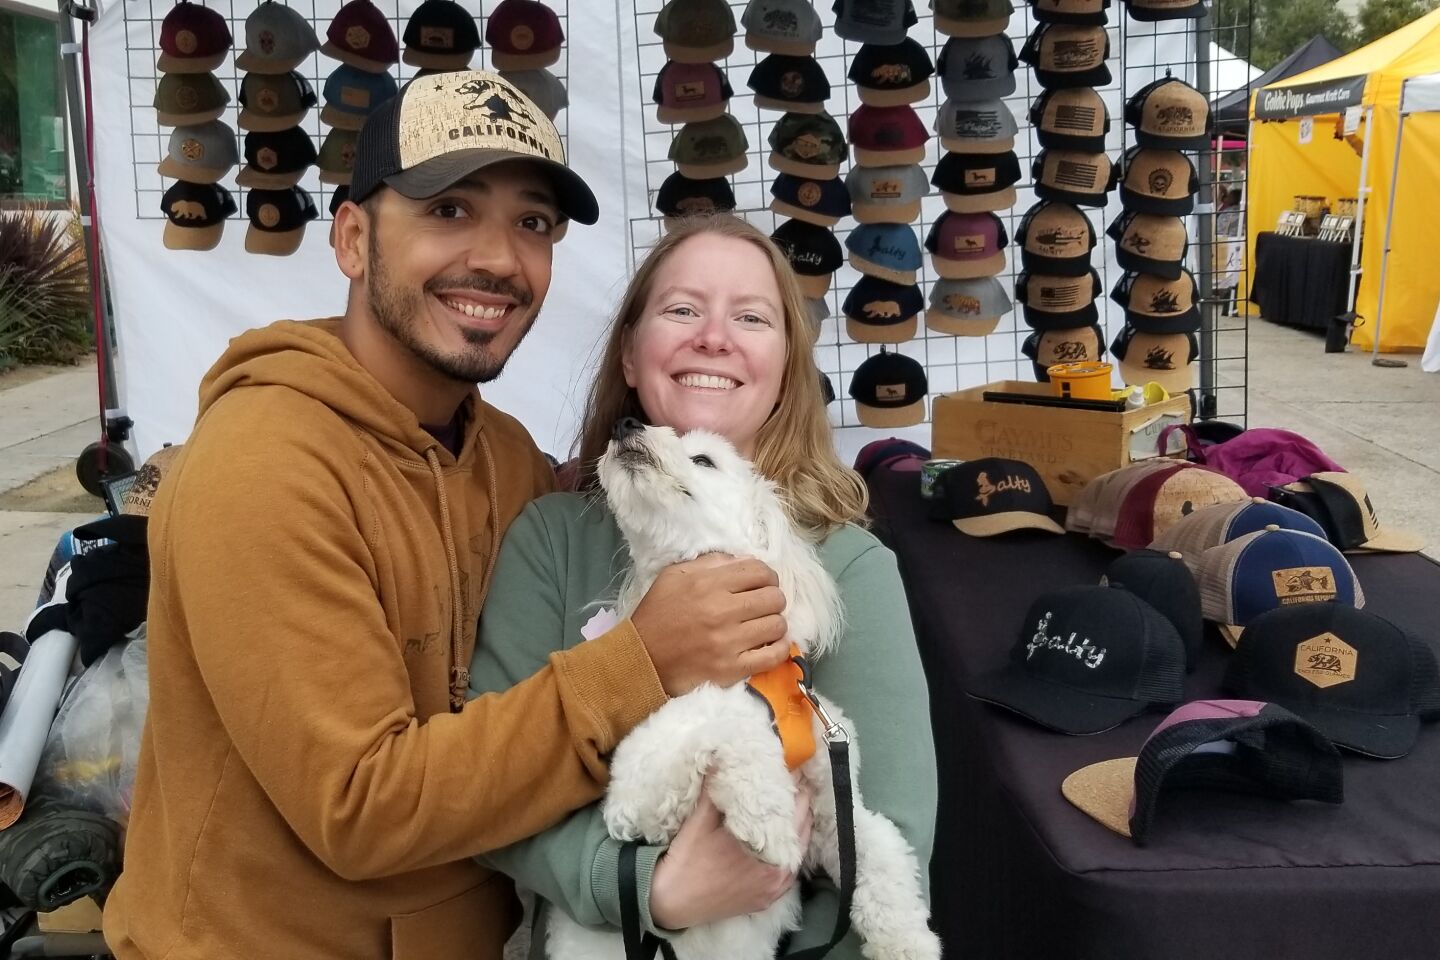 Jesus Medina tries on hats while he and Melissa Rose try to wrangle Toby into smiling for the camera.